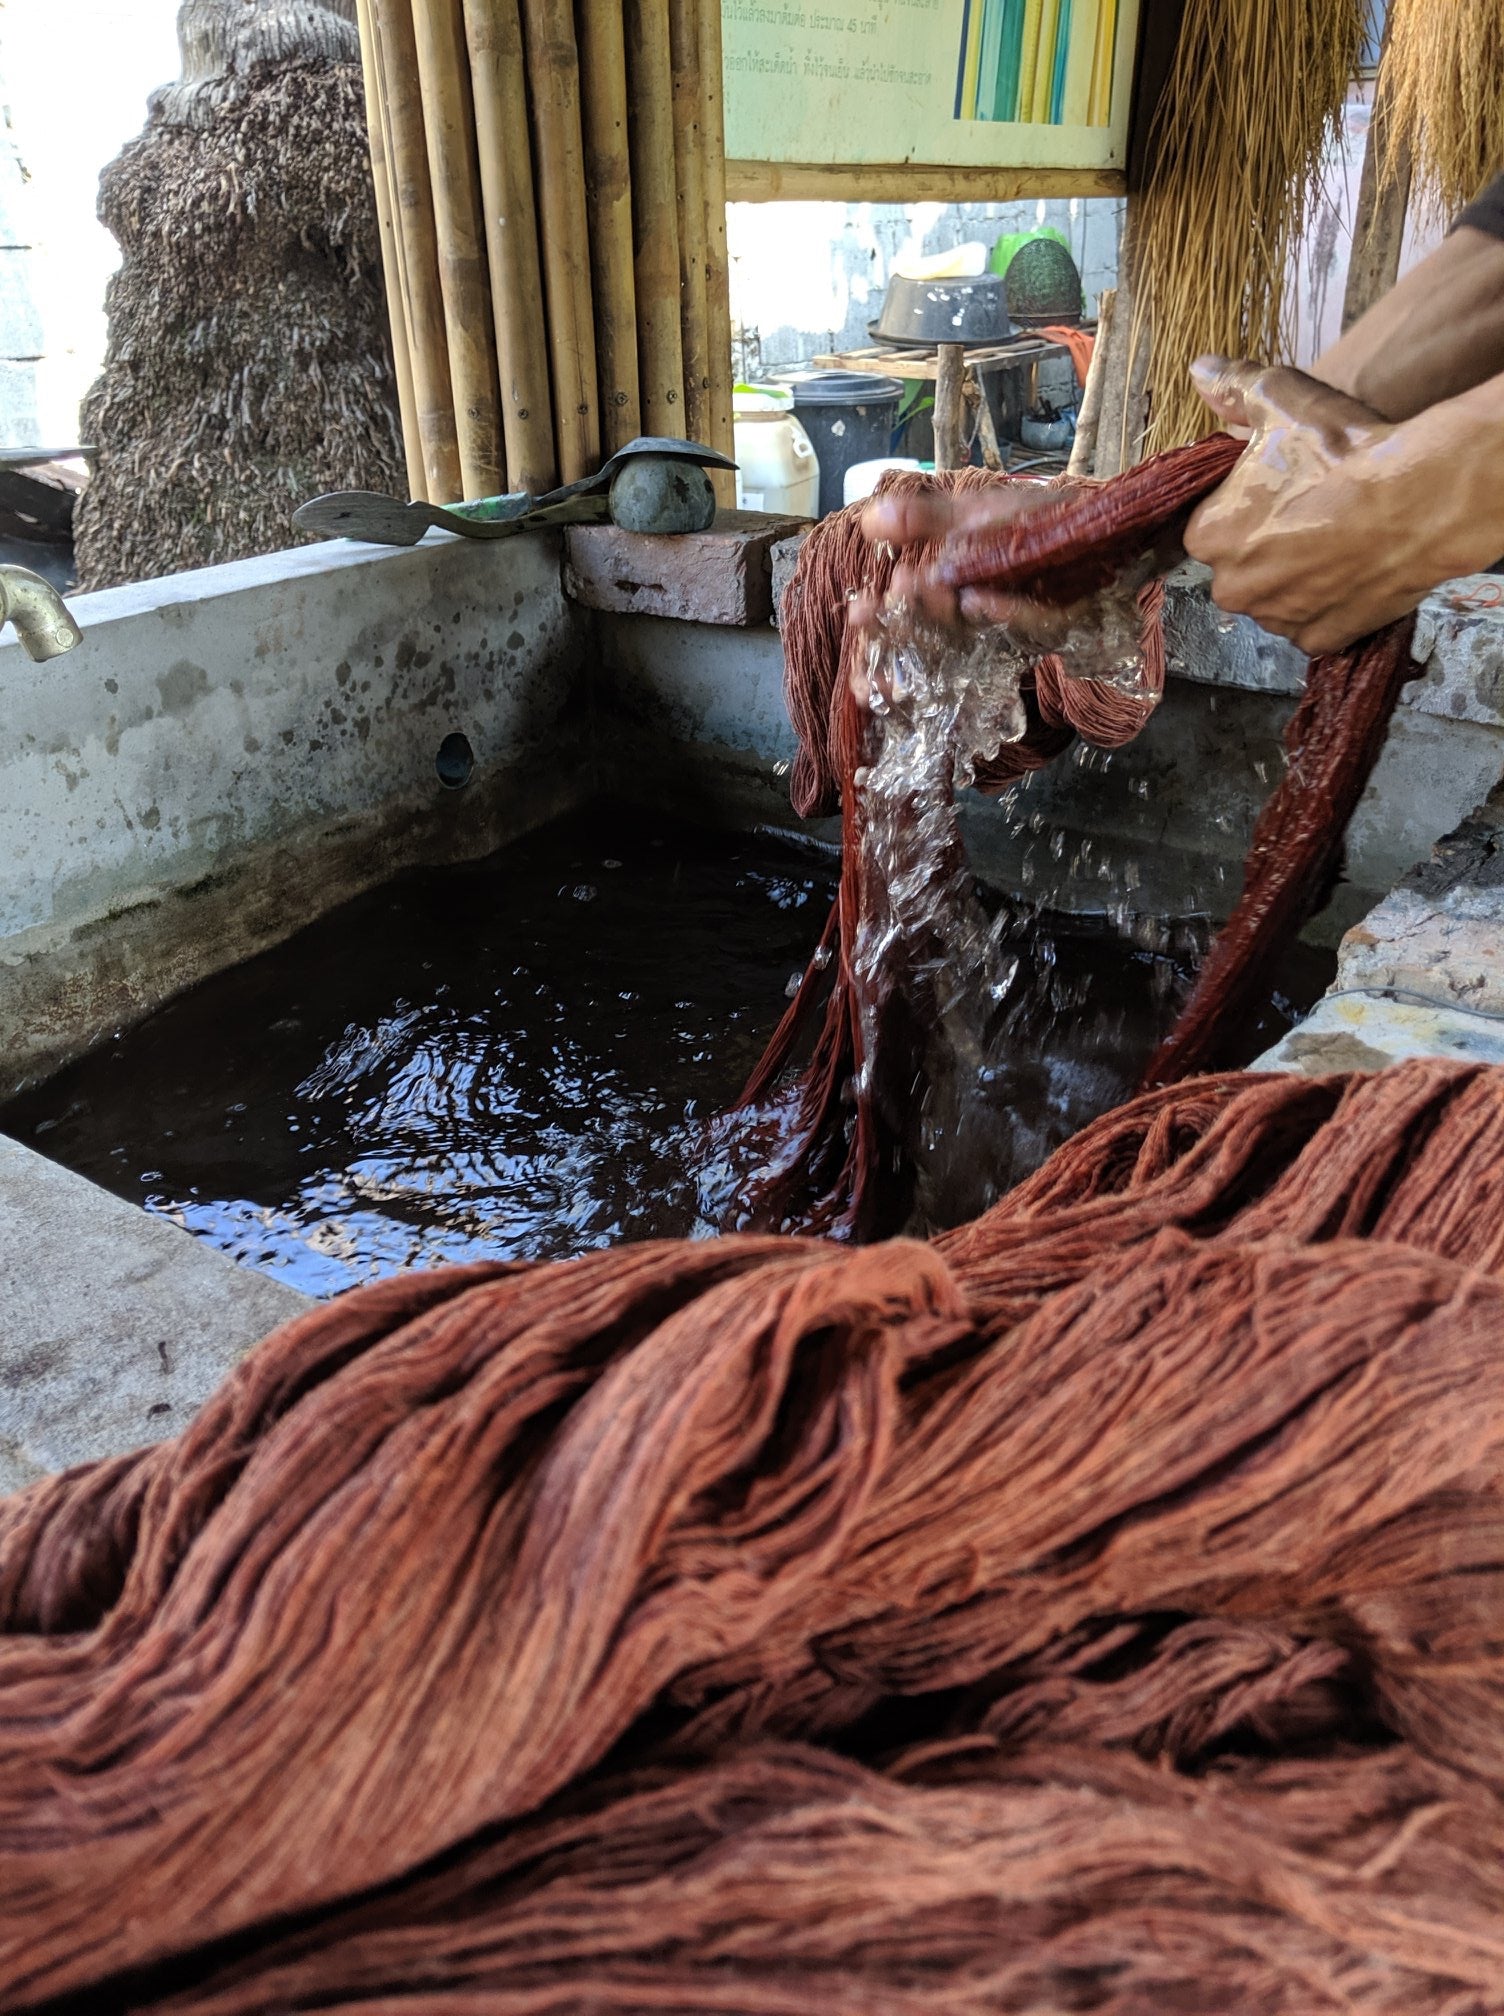 Close up of hands squeezing yarn through water as part of the natural dyeing process